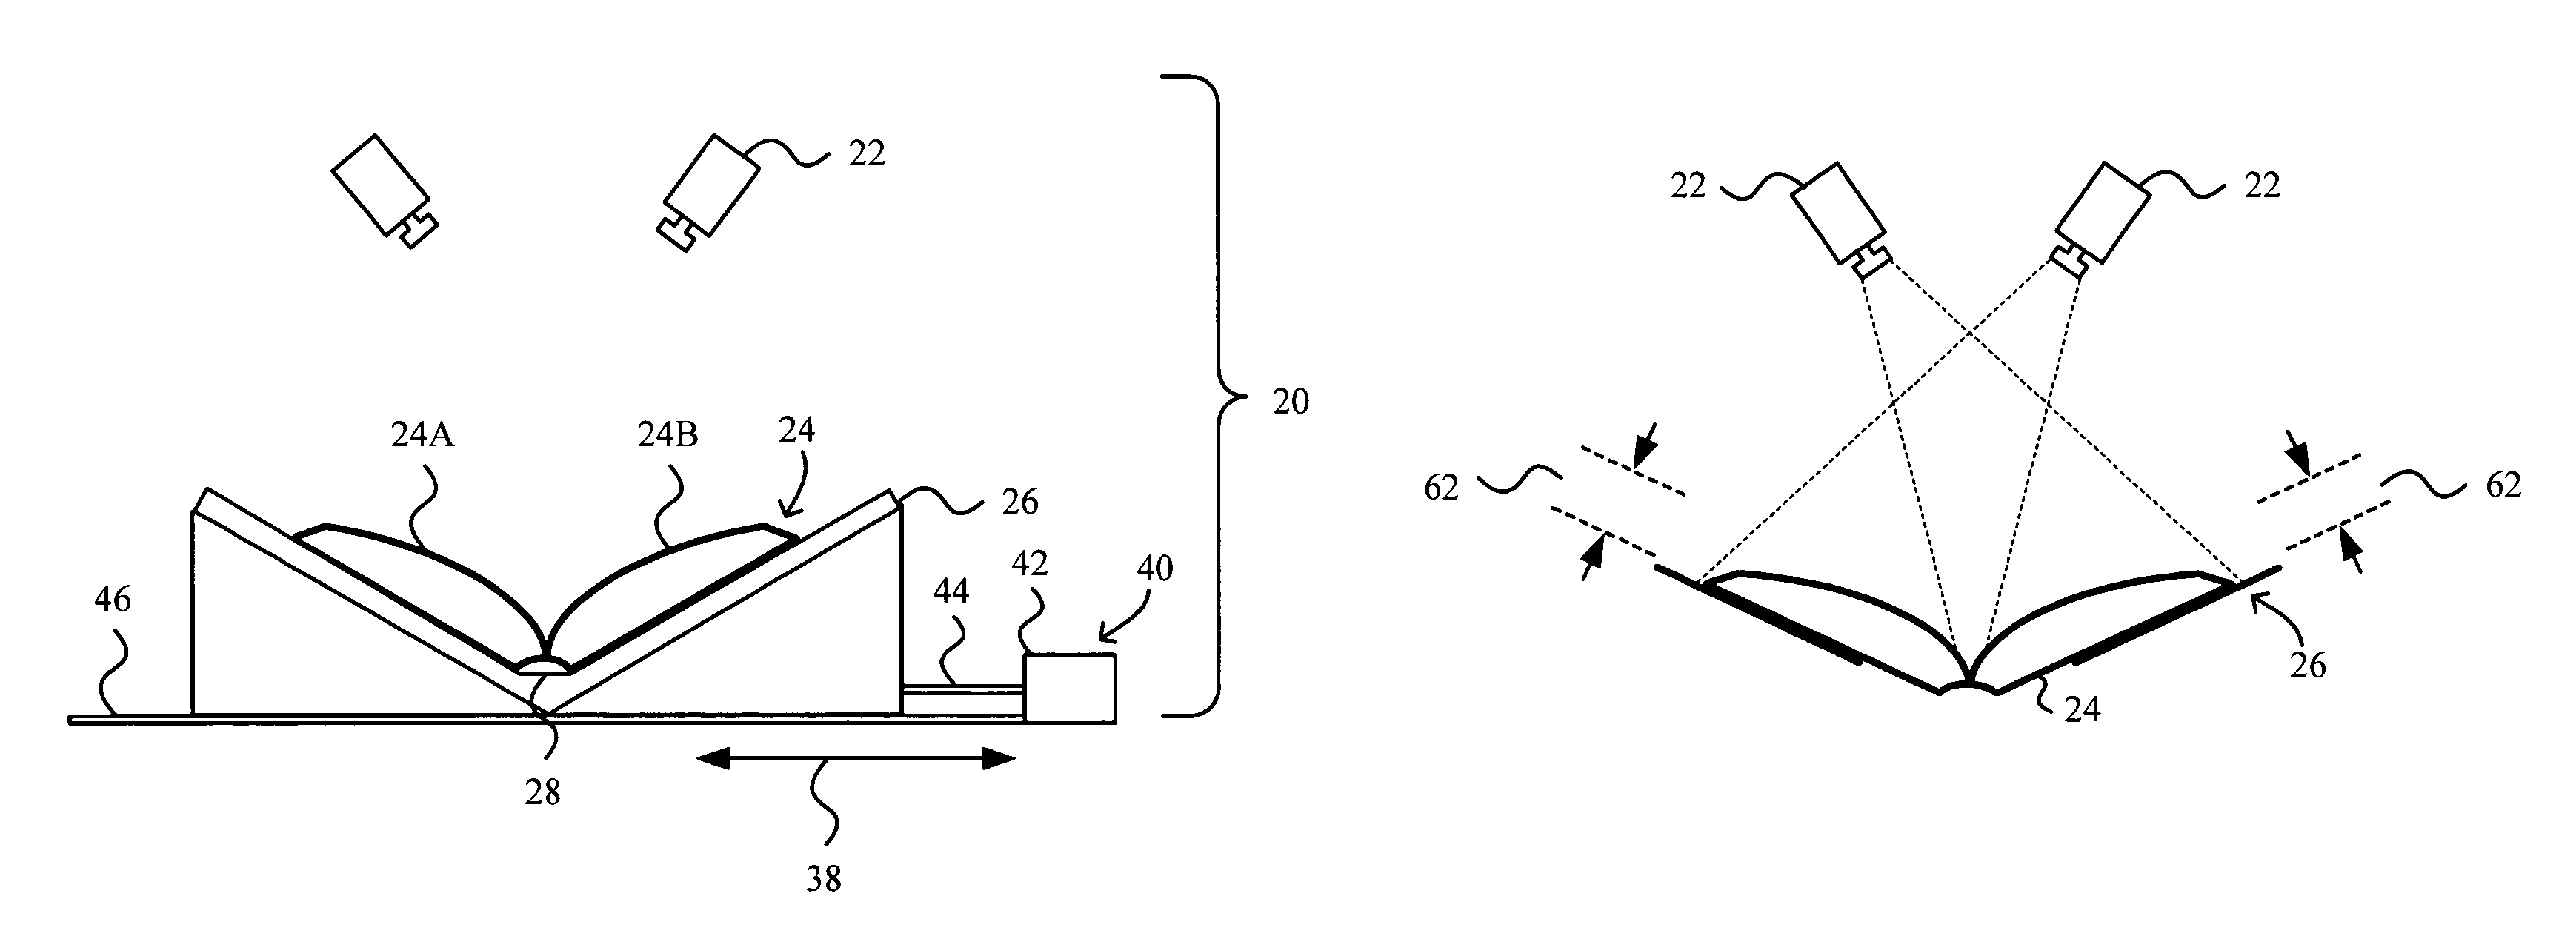 Movable document cradle for facilitating imaging of bound documents